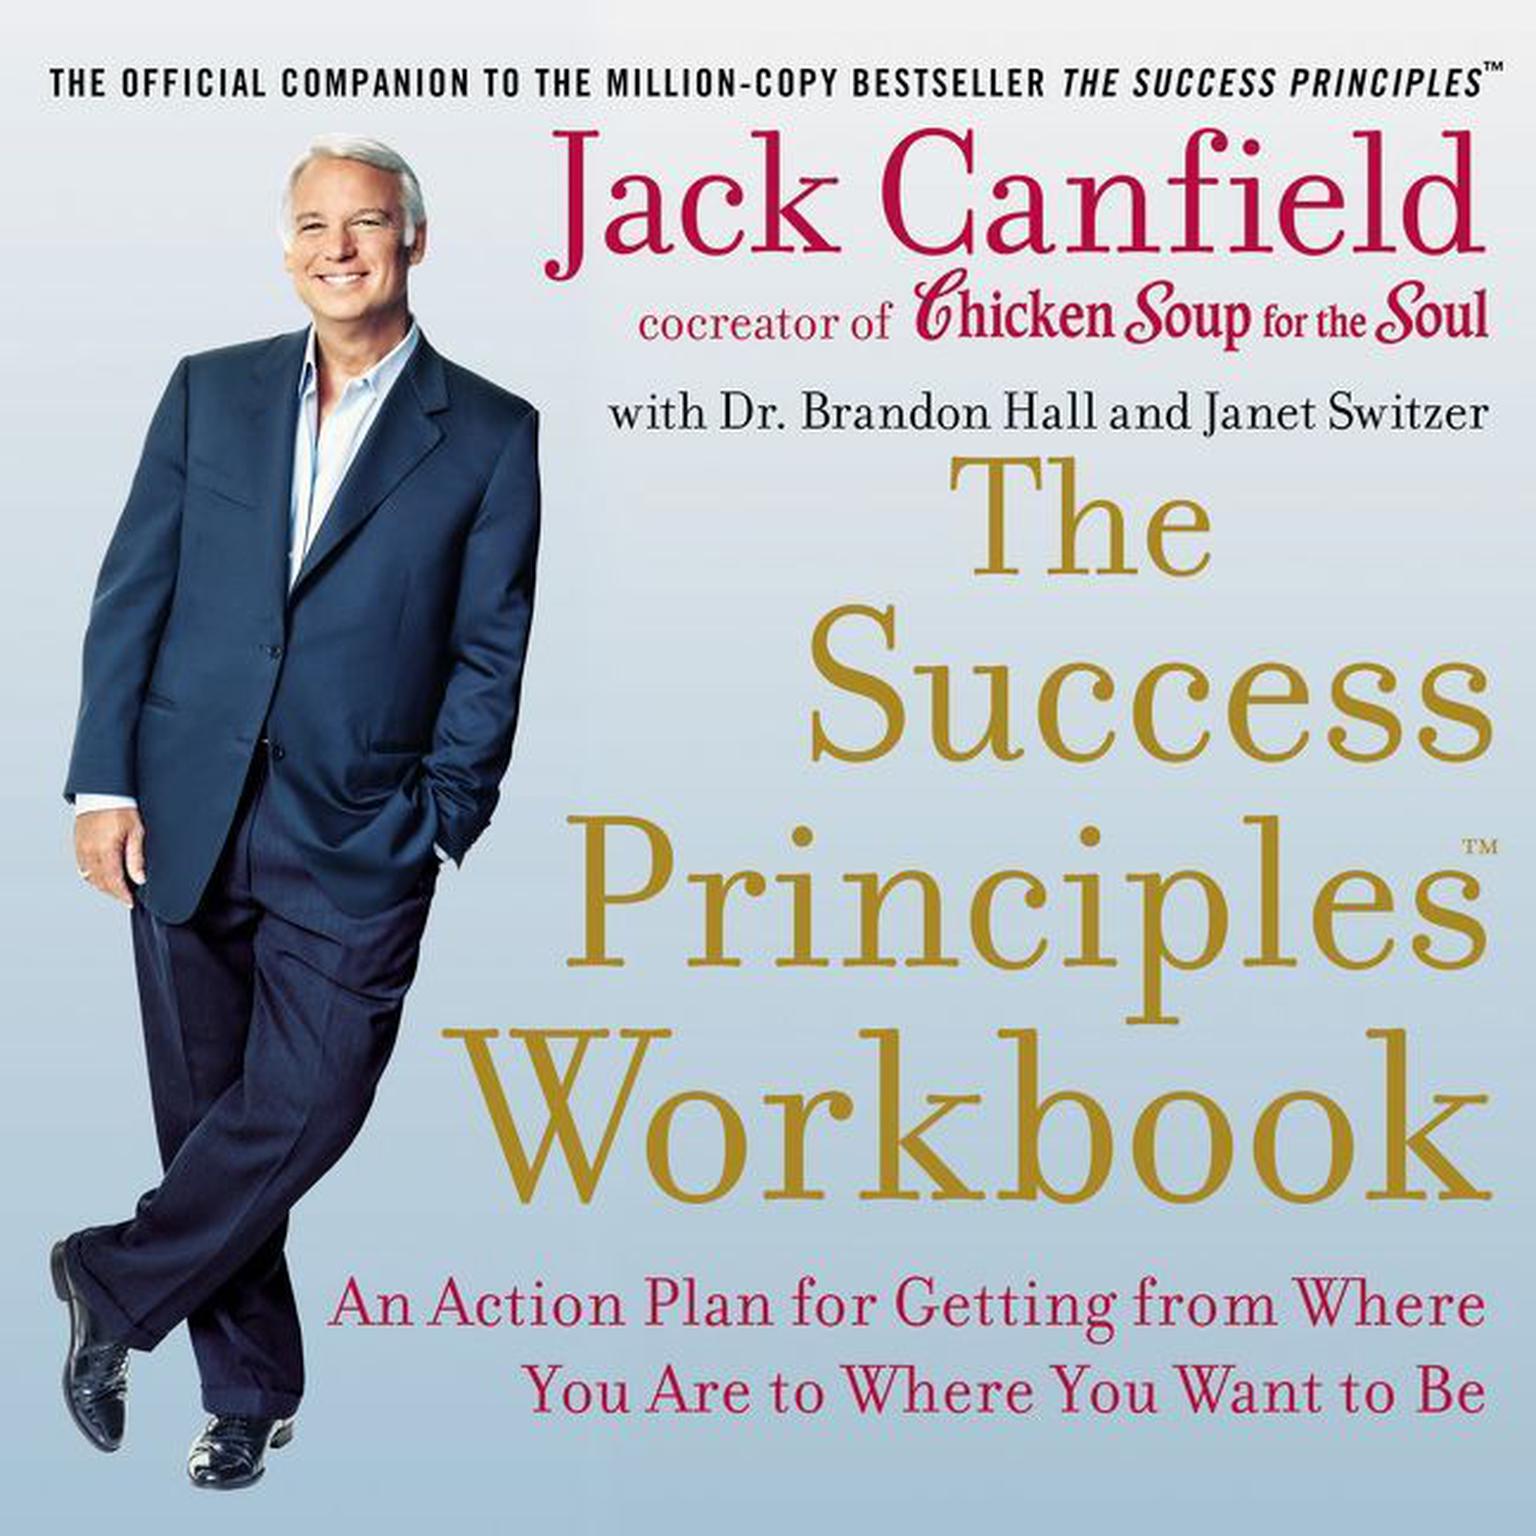 The Success Principles Workbook: An Action Plan for Getting from Where You Are to Where You Want to Be Audiobook, by Jack Canfield